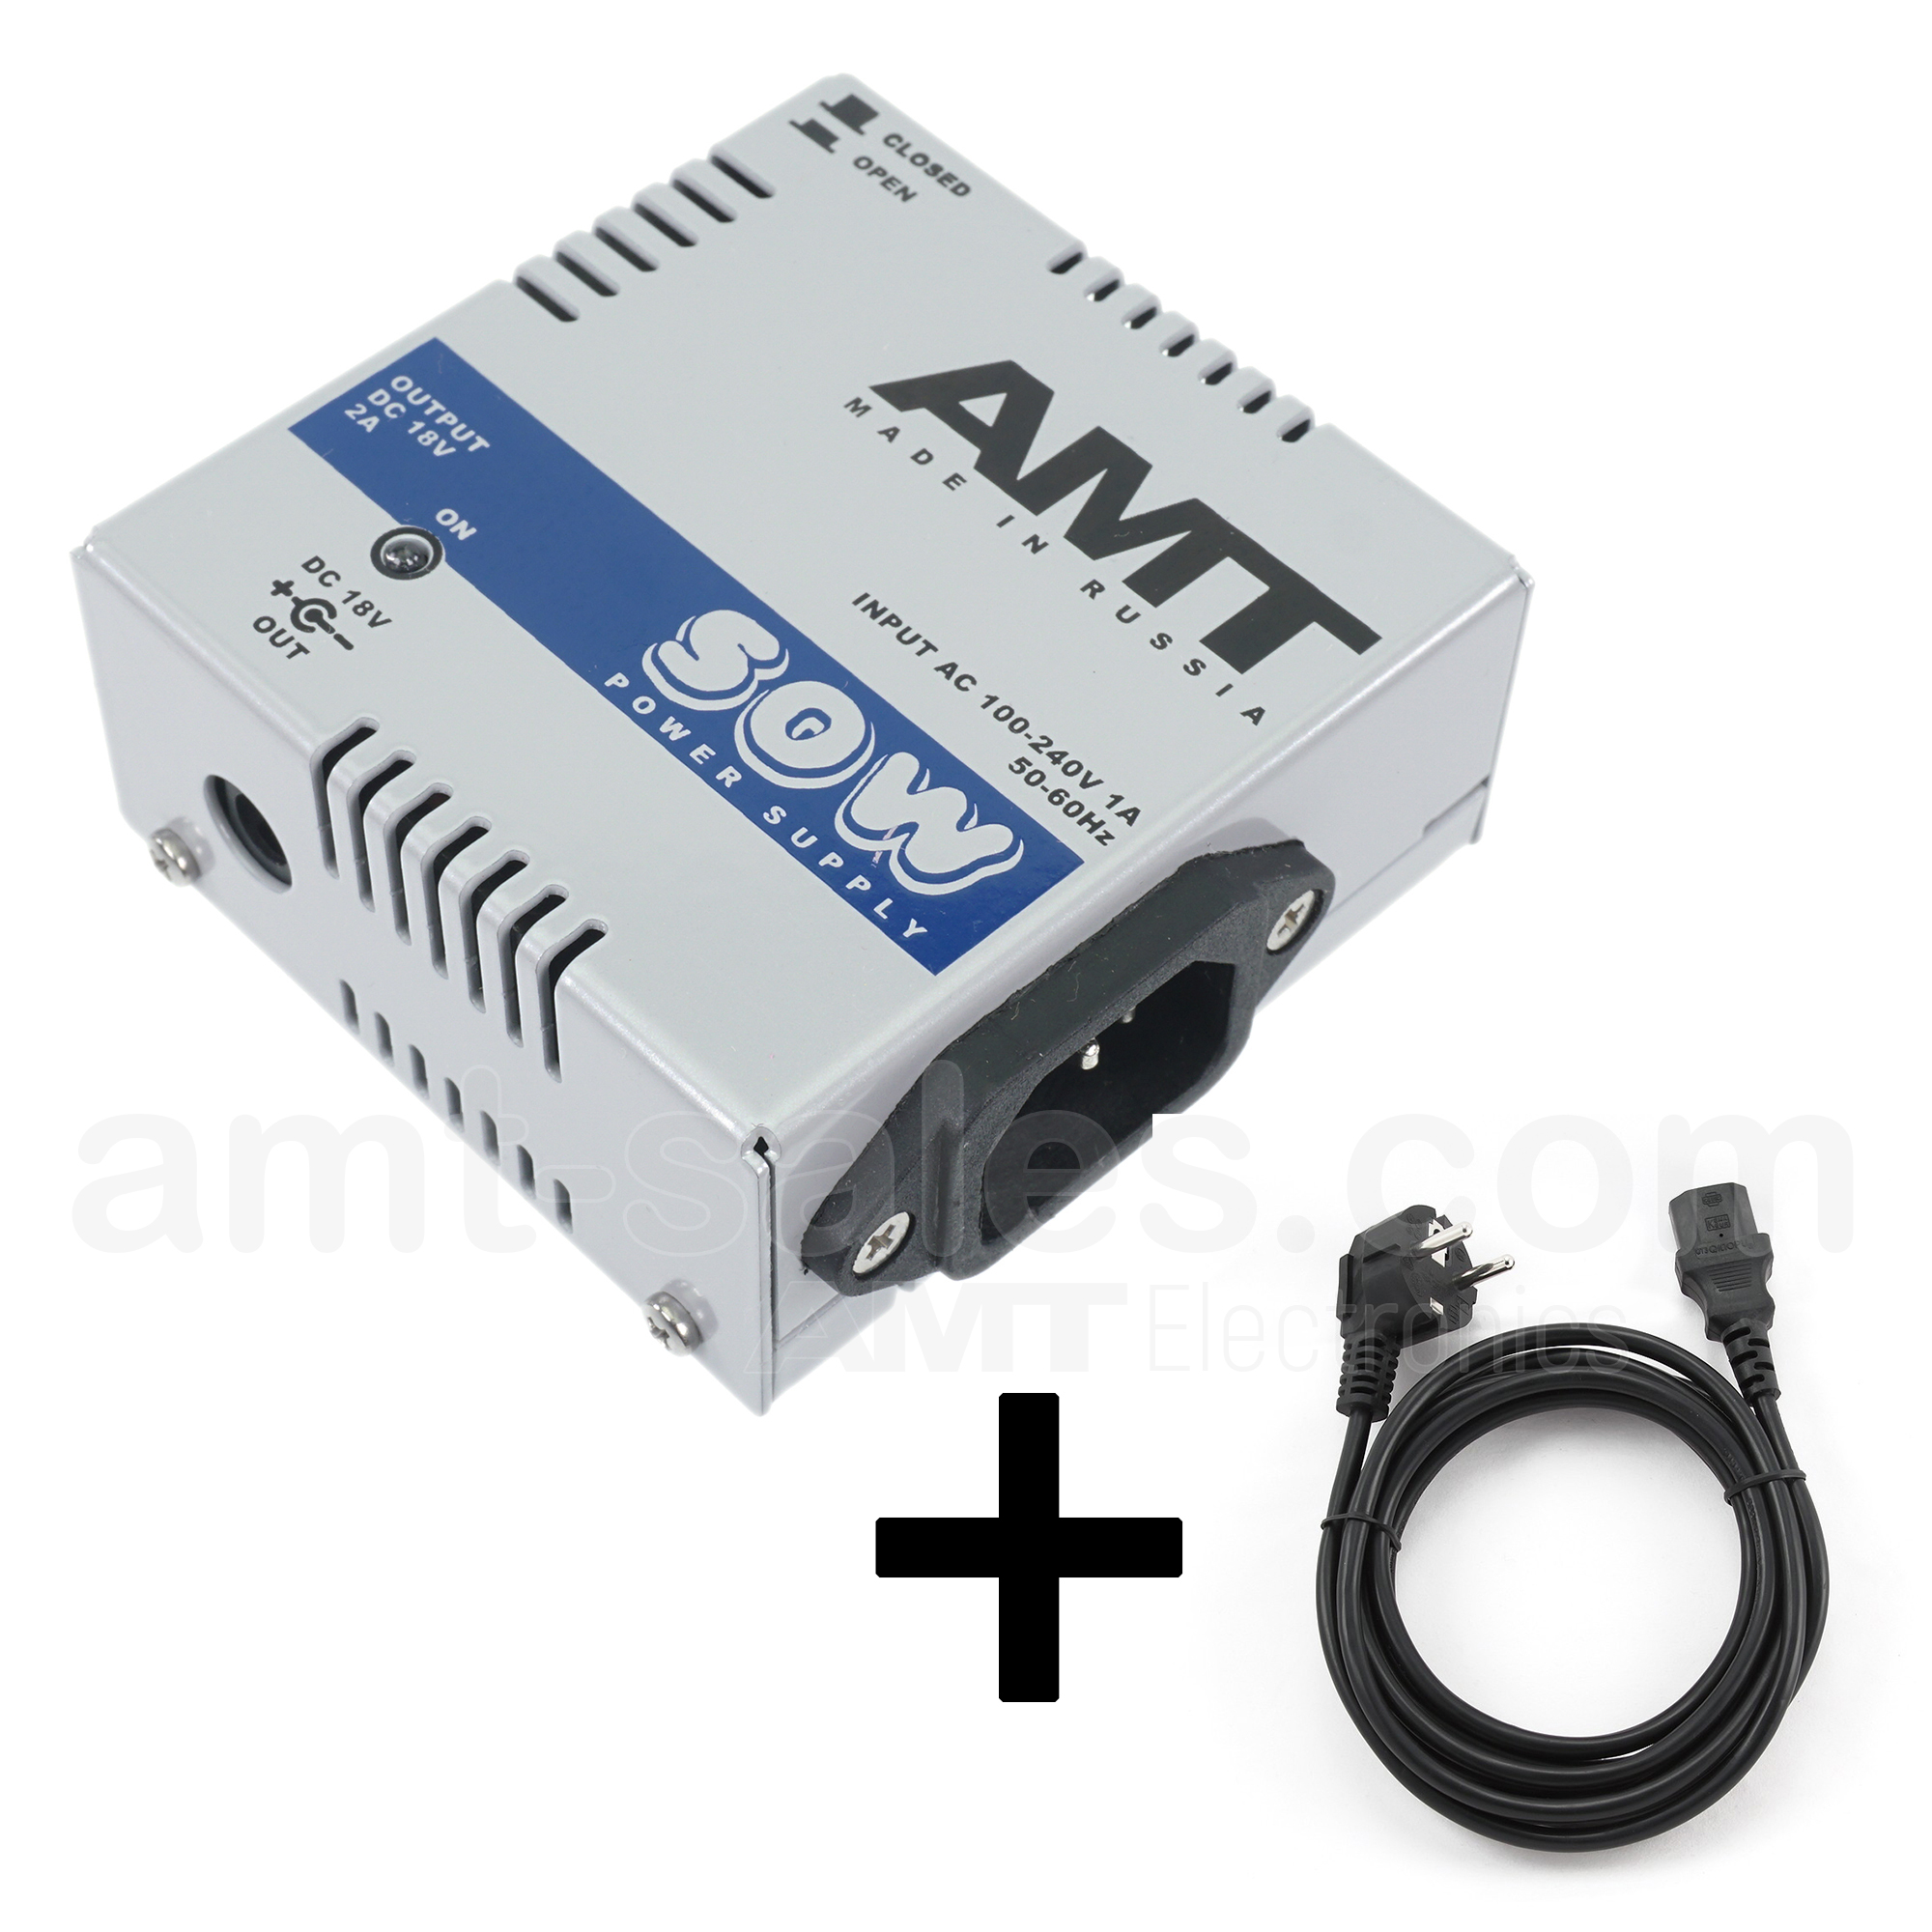 AMT SOW PS ACDC-18V - primary power module